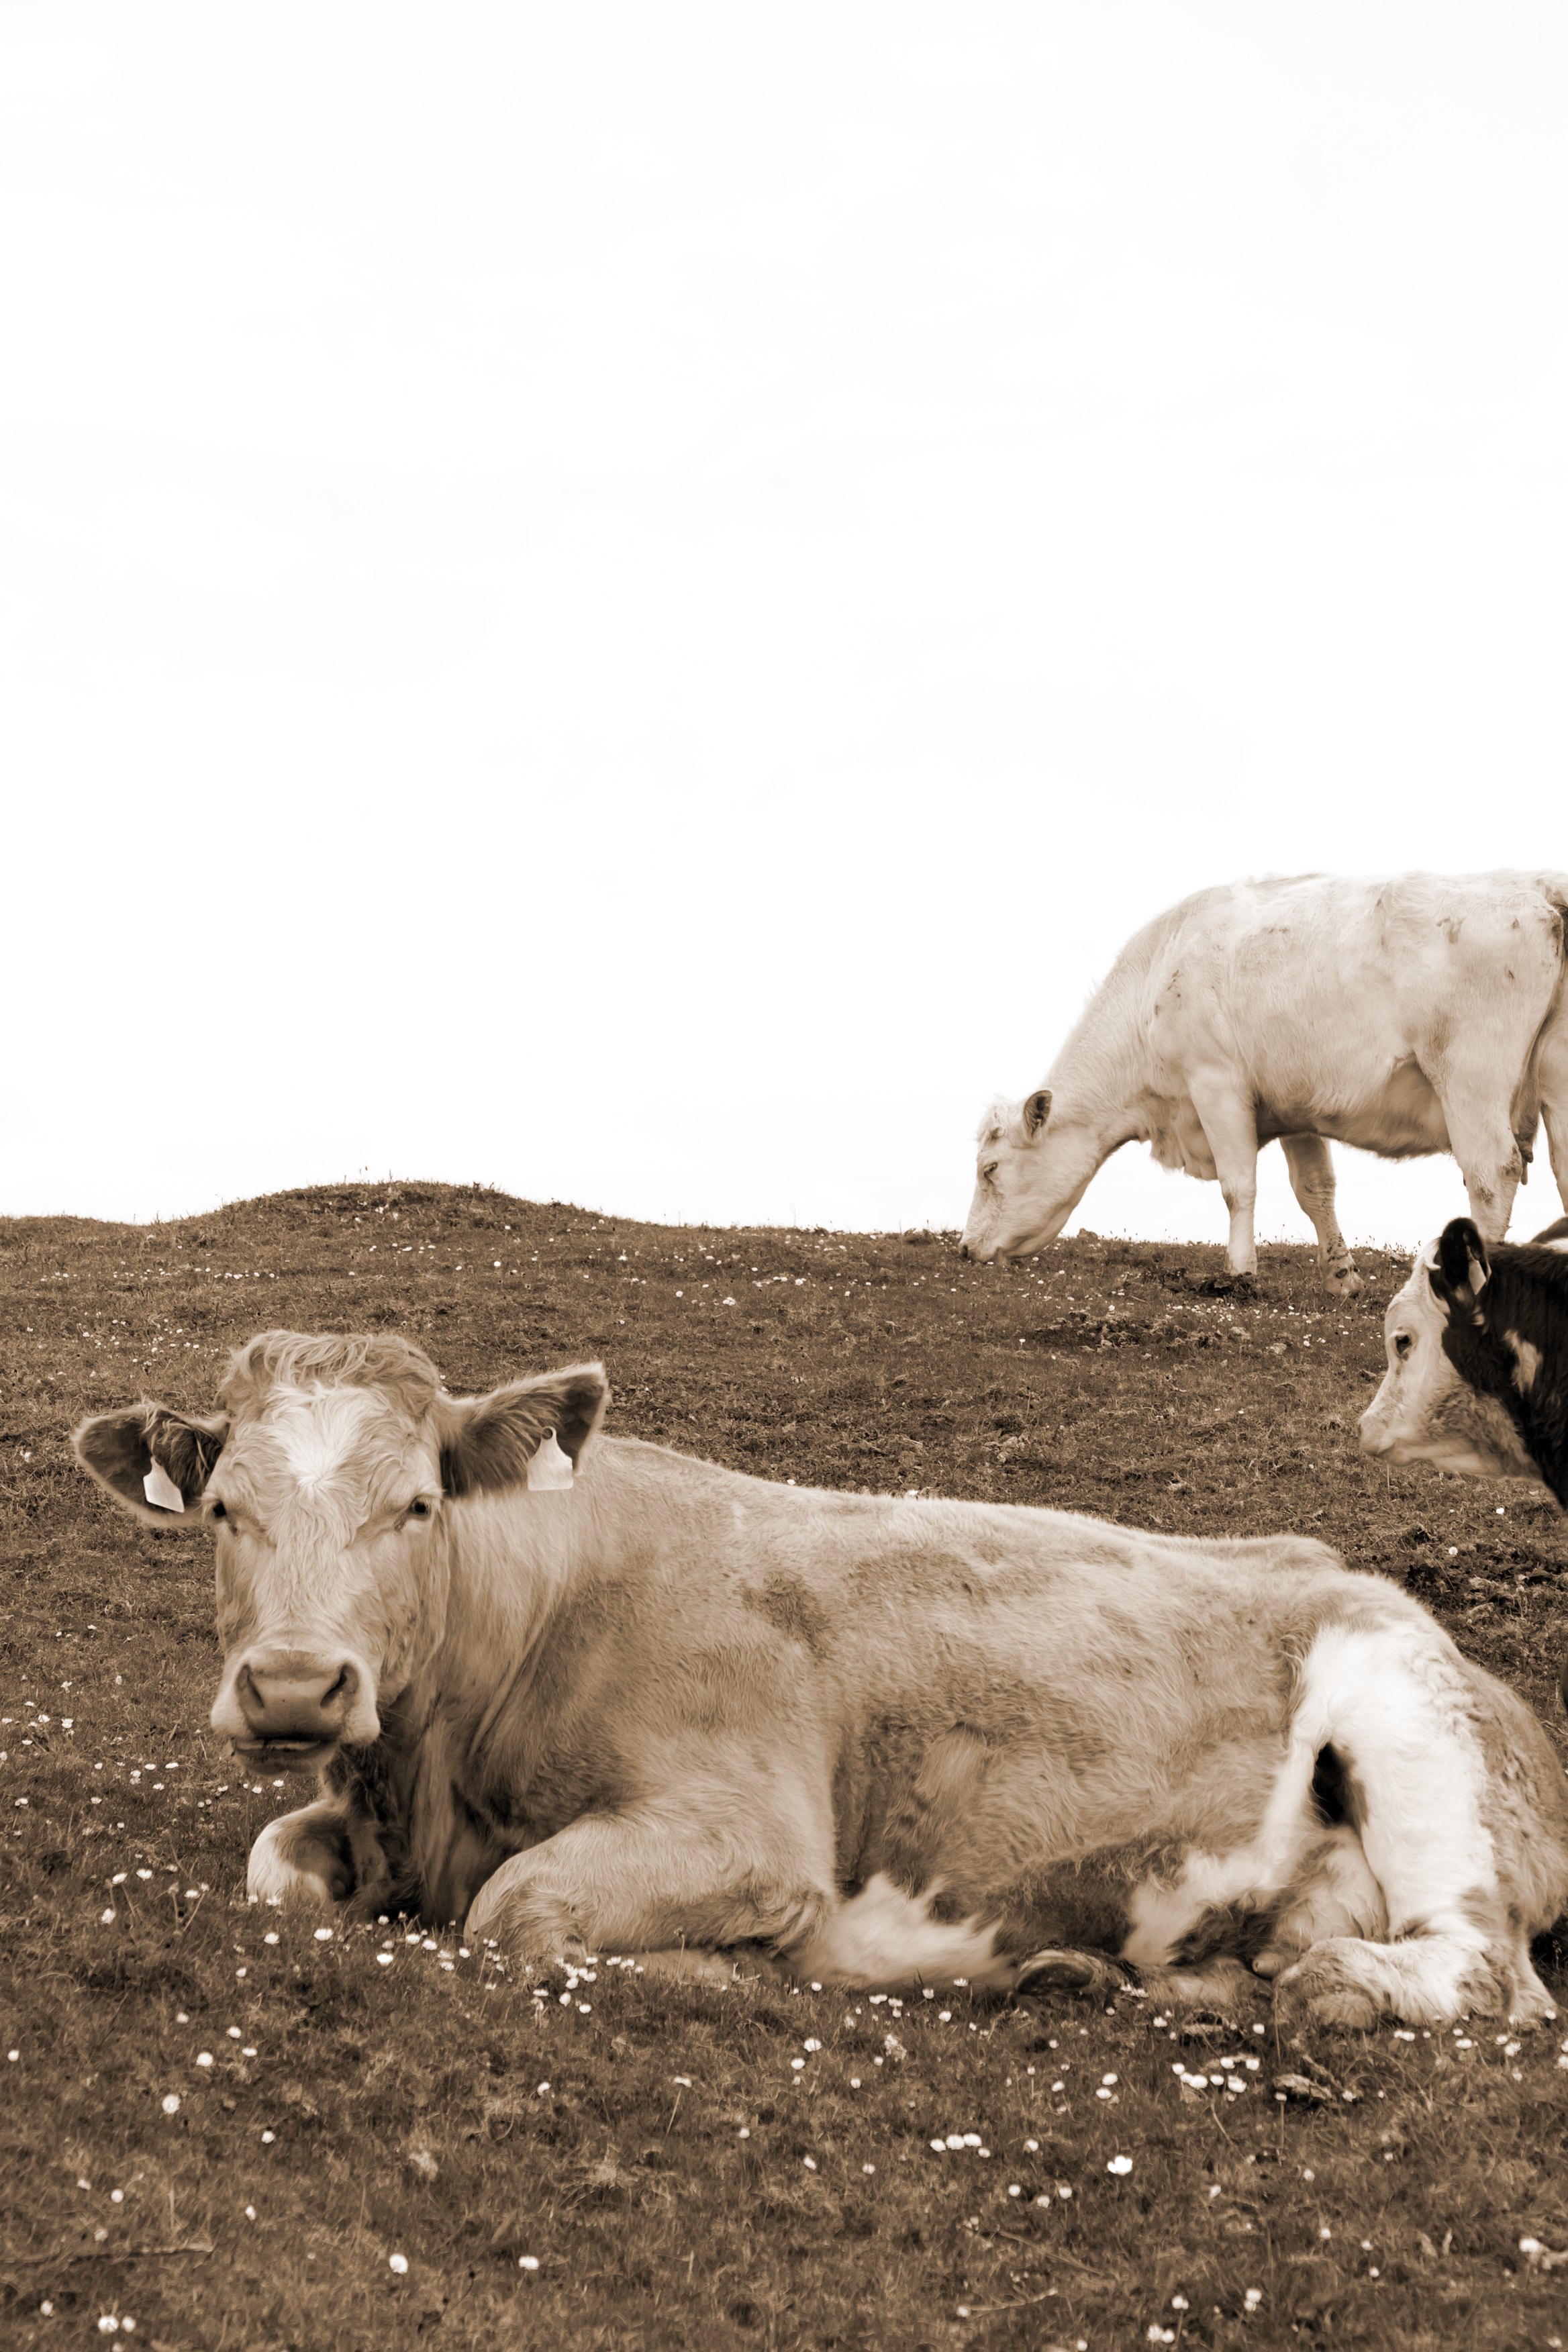 Cattle Feeding On The Green Grass In Sepia